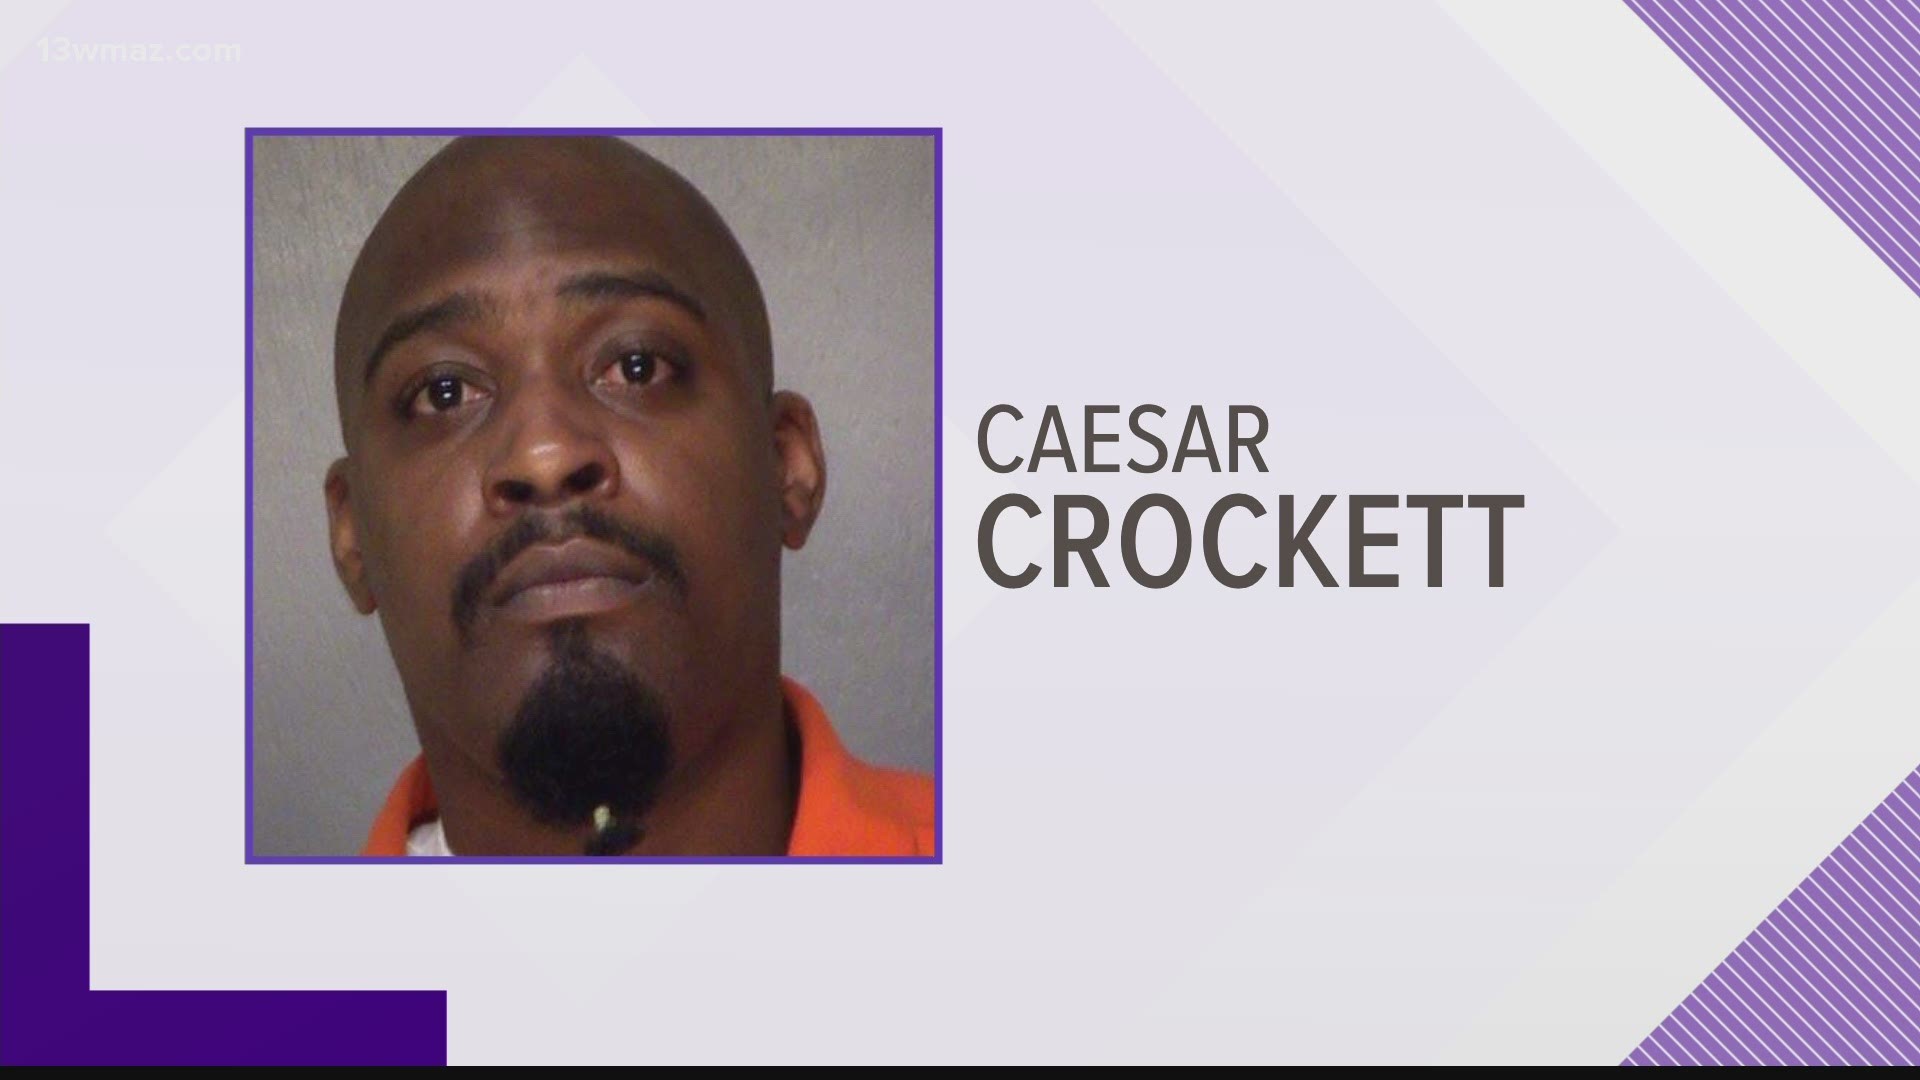 Caesar Crockett was accused of killing three members of his son's family, including the boy's maternal grandparents, then taking the 2-year-old to Florida.